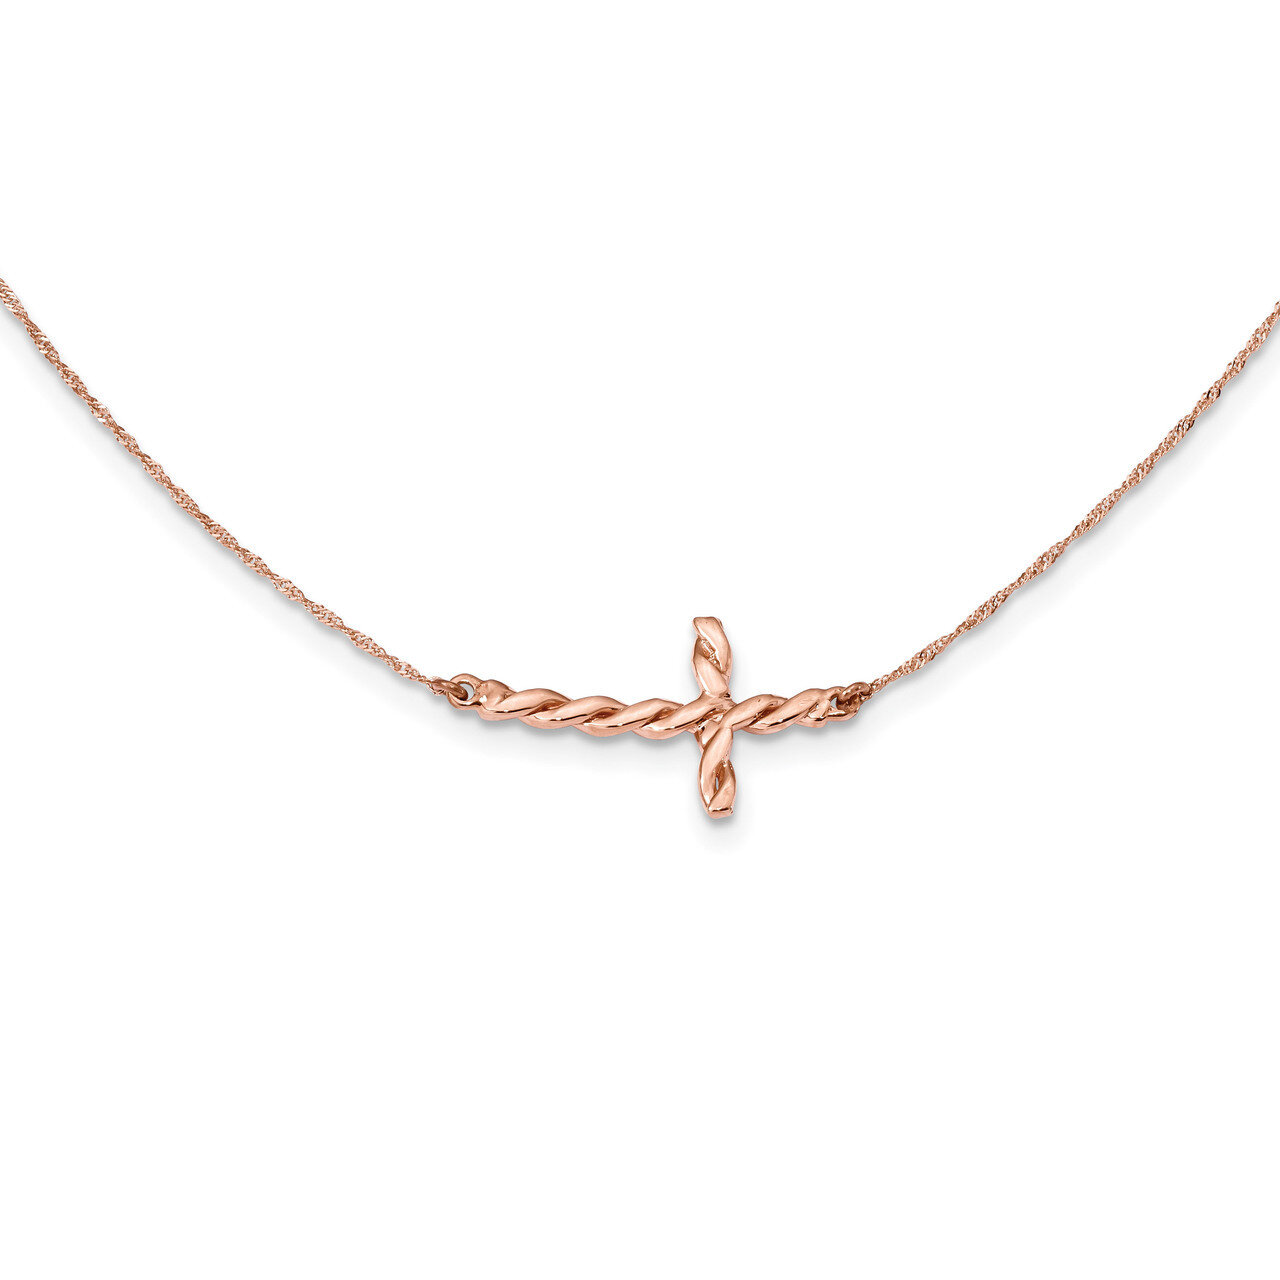 17 Inch Polished Twisted Sideways Cross 17 inch Necklace 14k Rose Gold SF2521-17